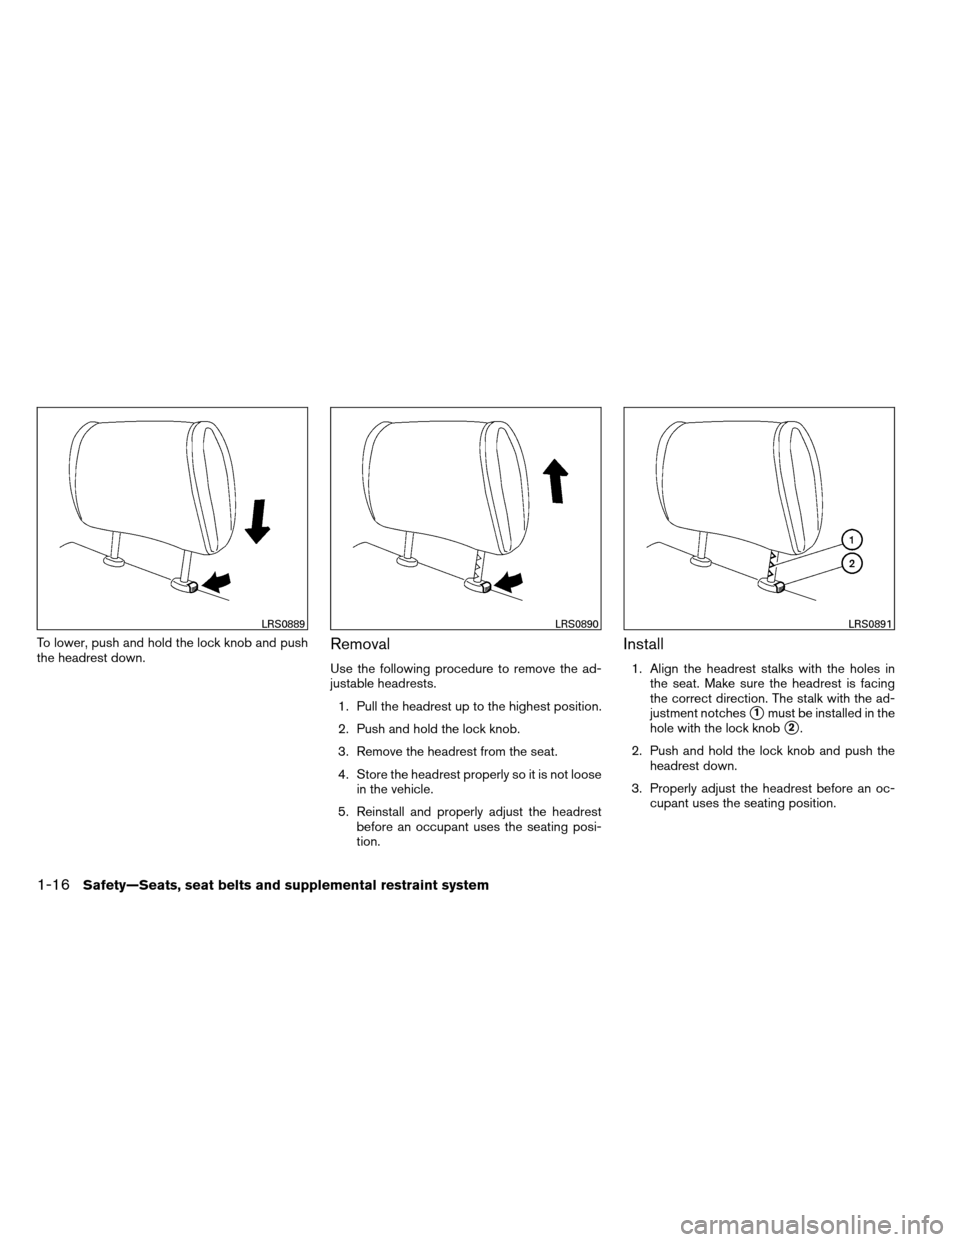 NISSAN ARMADA 2012 1.G Owners Guide To lower, push and hold the lock knob and push
the headrest down.Removal
Use the following procedure to remove the ad-
justable headrests.1. Pull the headrest up to the highest position.
2. Push and h